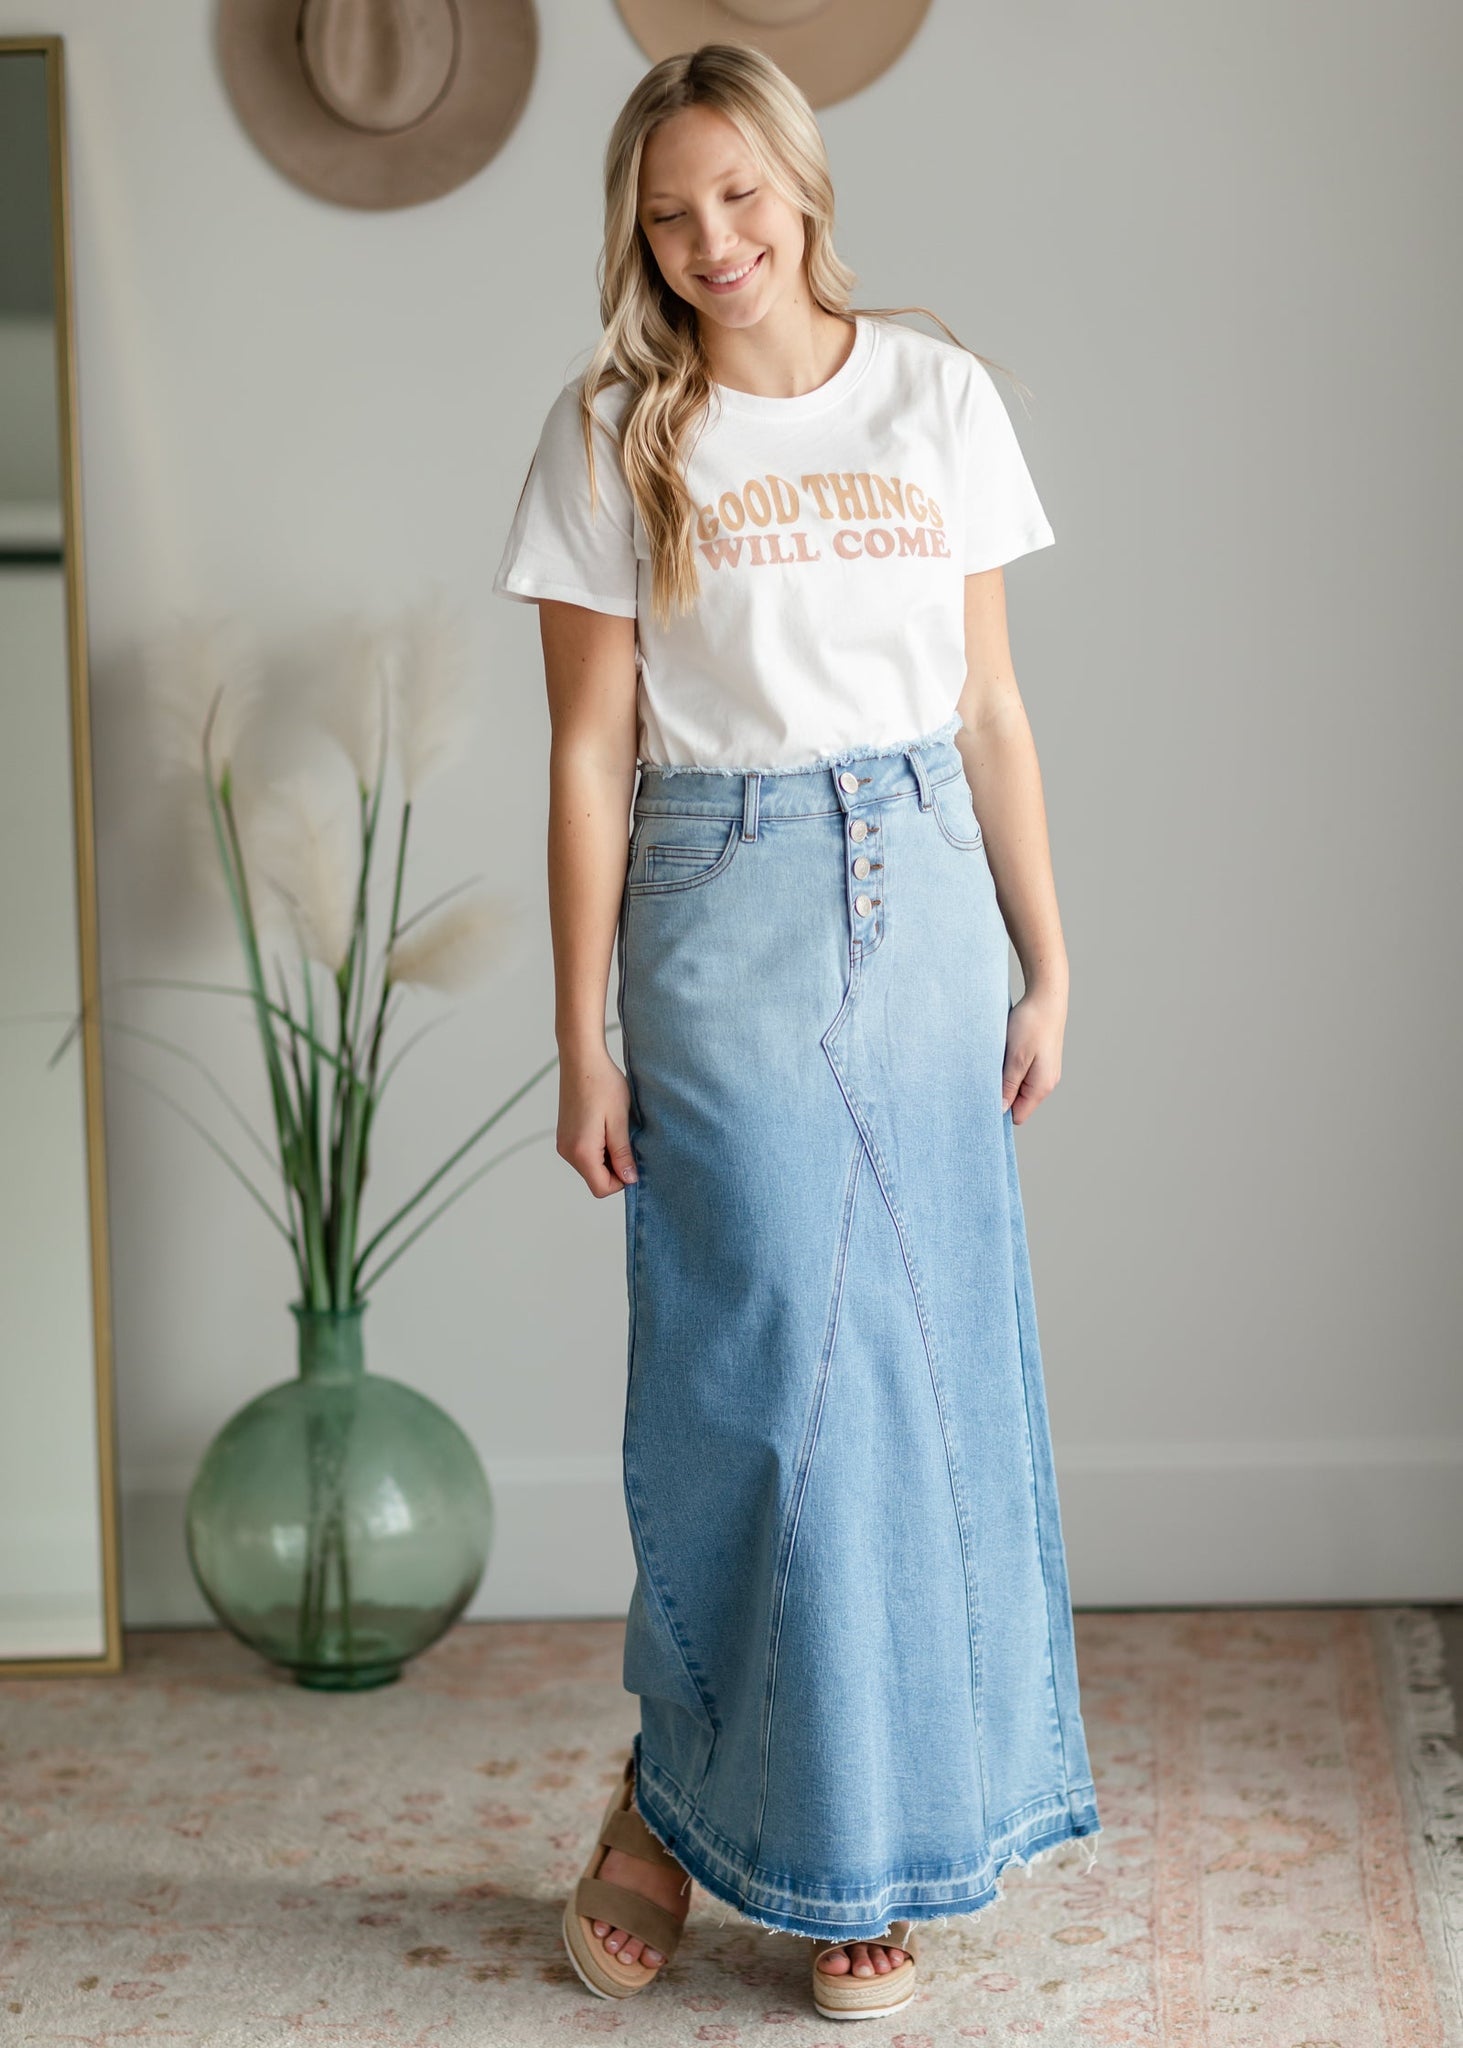 Move Aside Miniskirts—It's All About The Denim Maxi Skirt Now